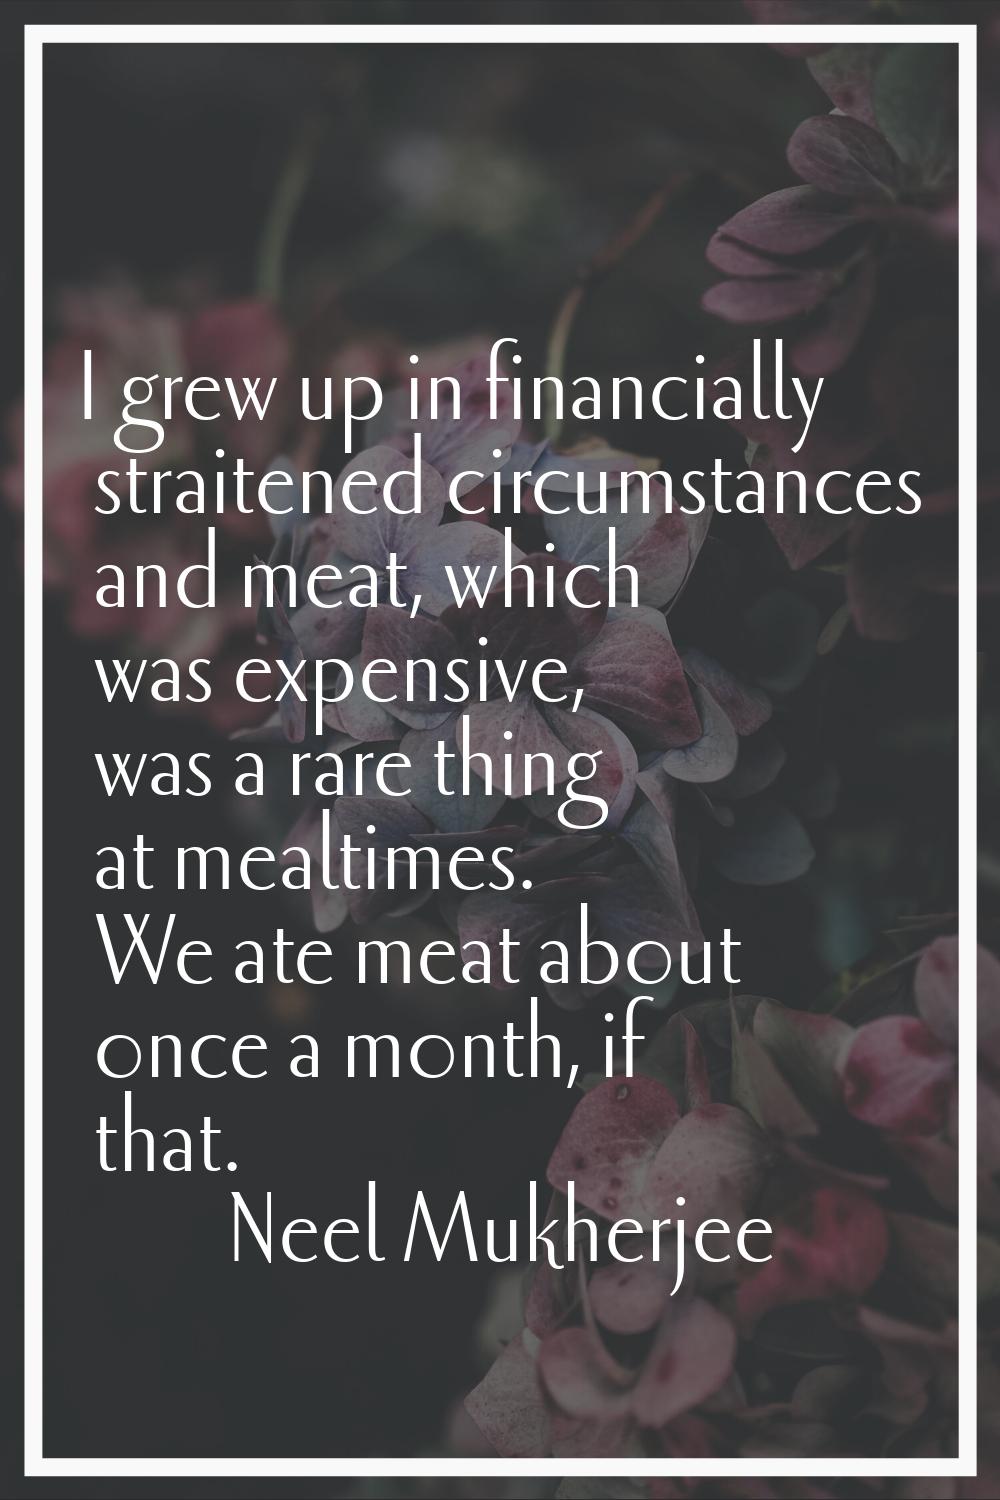 I grew up in financially straitened circumstances and meat, which was expensive, was a rare thing a